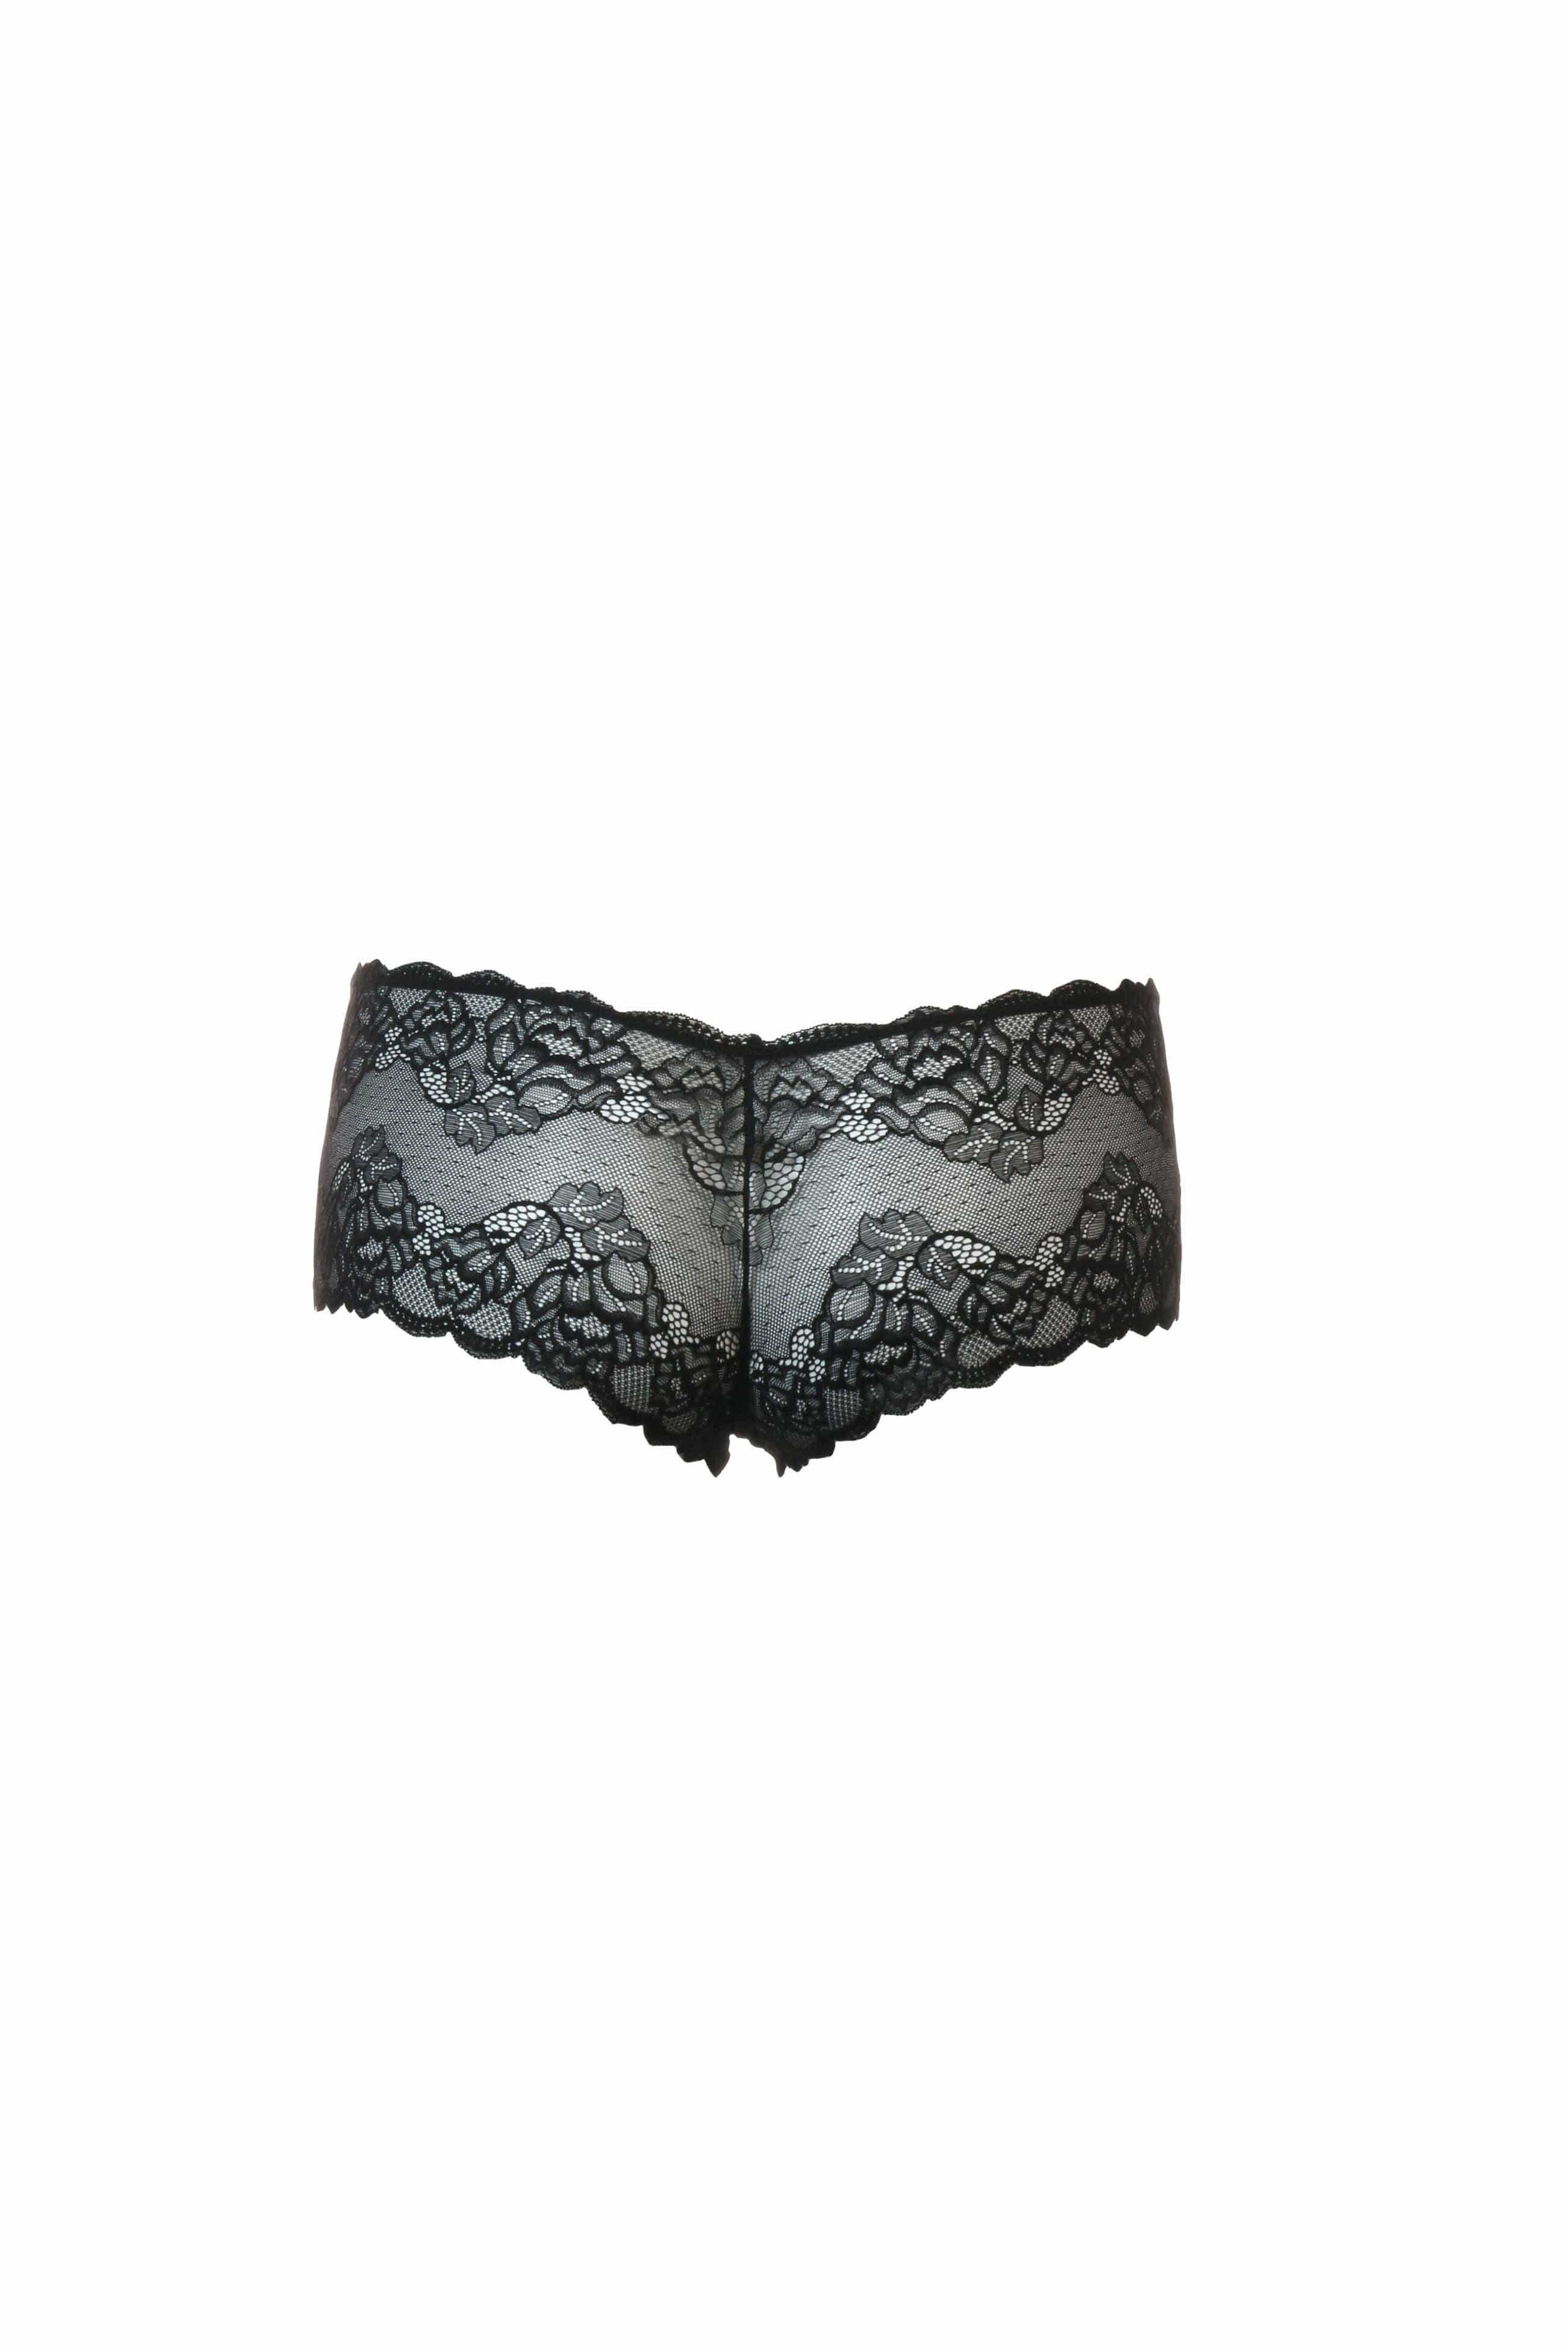 Lace Ouvert Panties, Gift for Wife Sheer Lace Knickers -  Norway